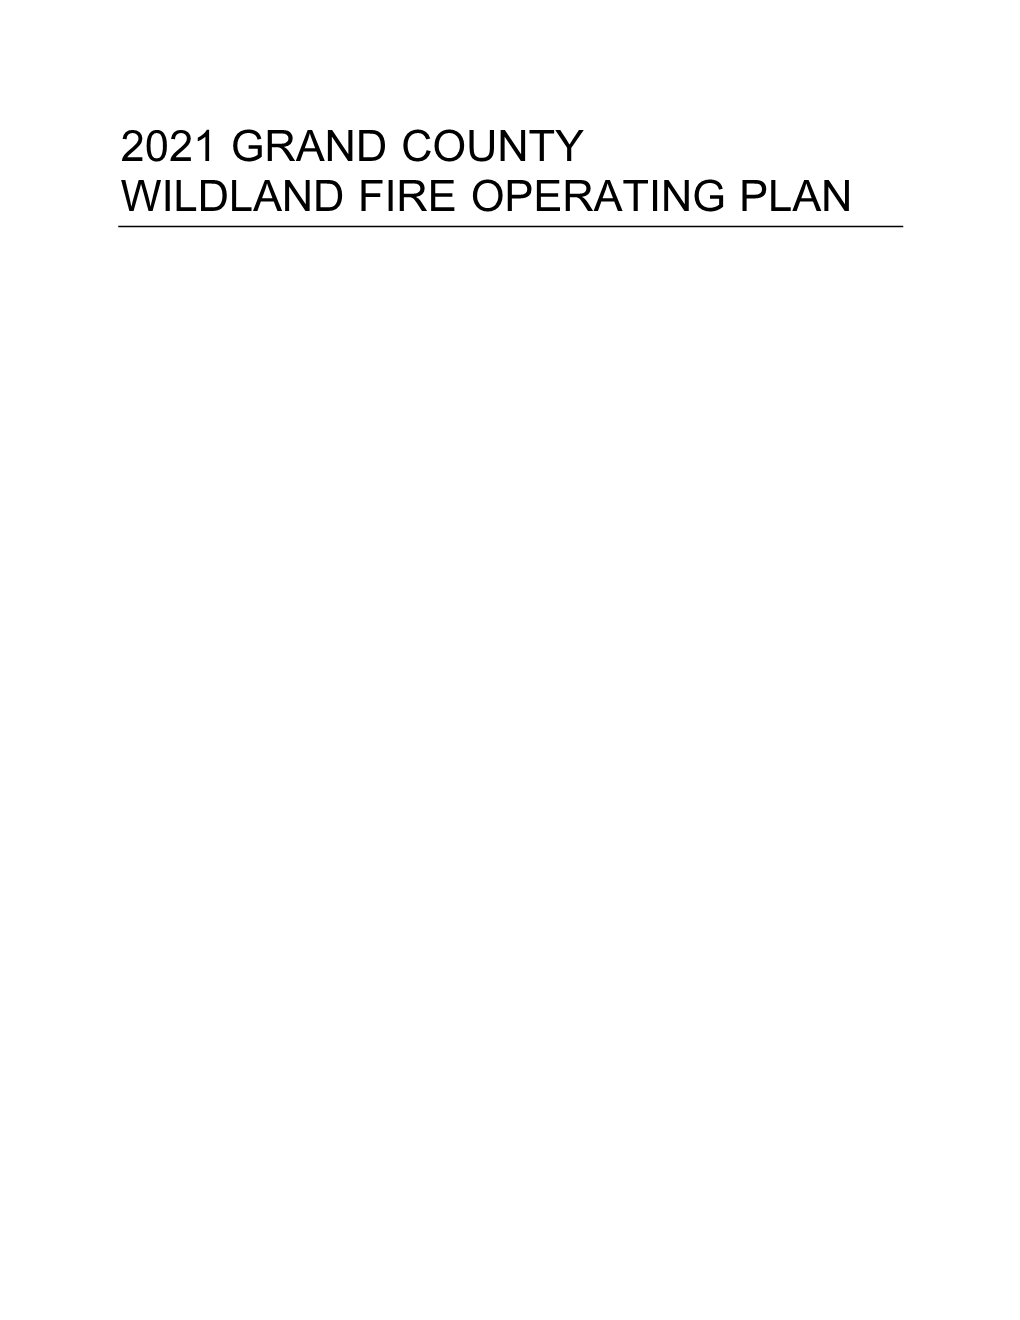 Grand County Wildland Fire Operating Plan Contents Preamble